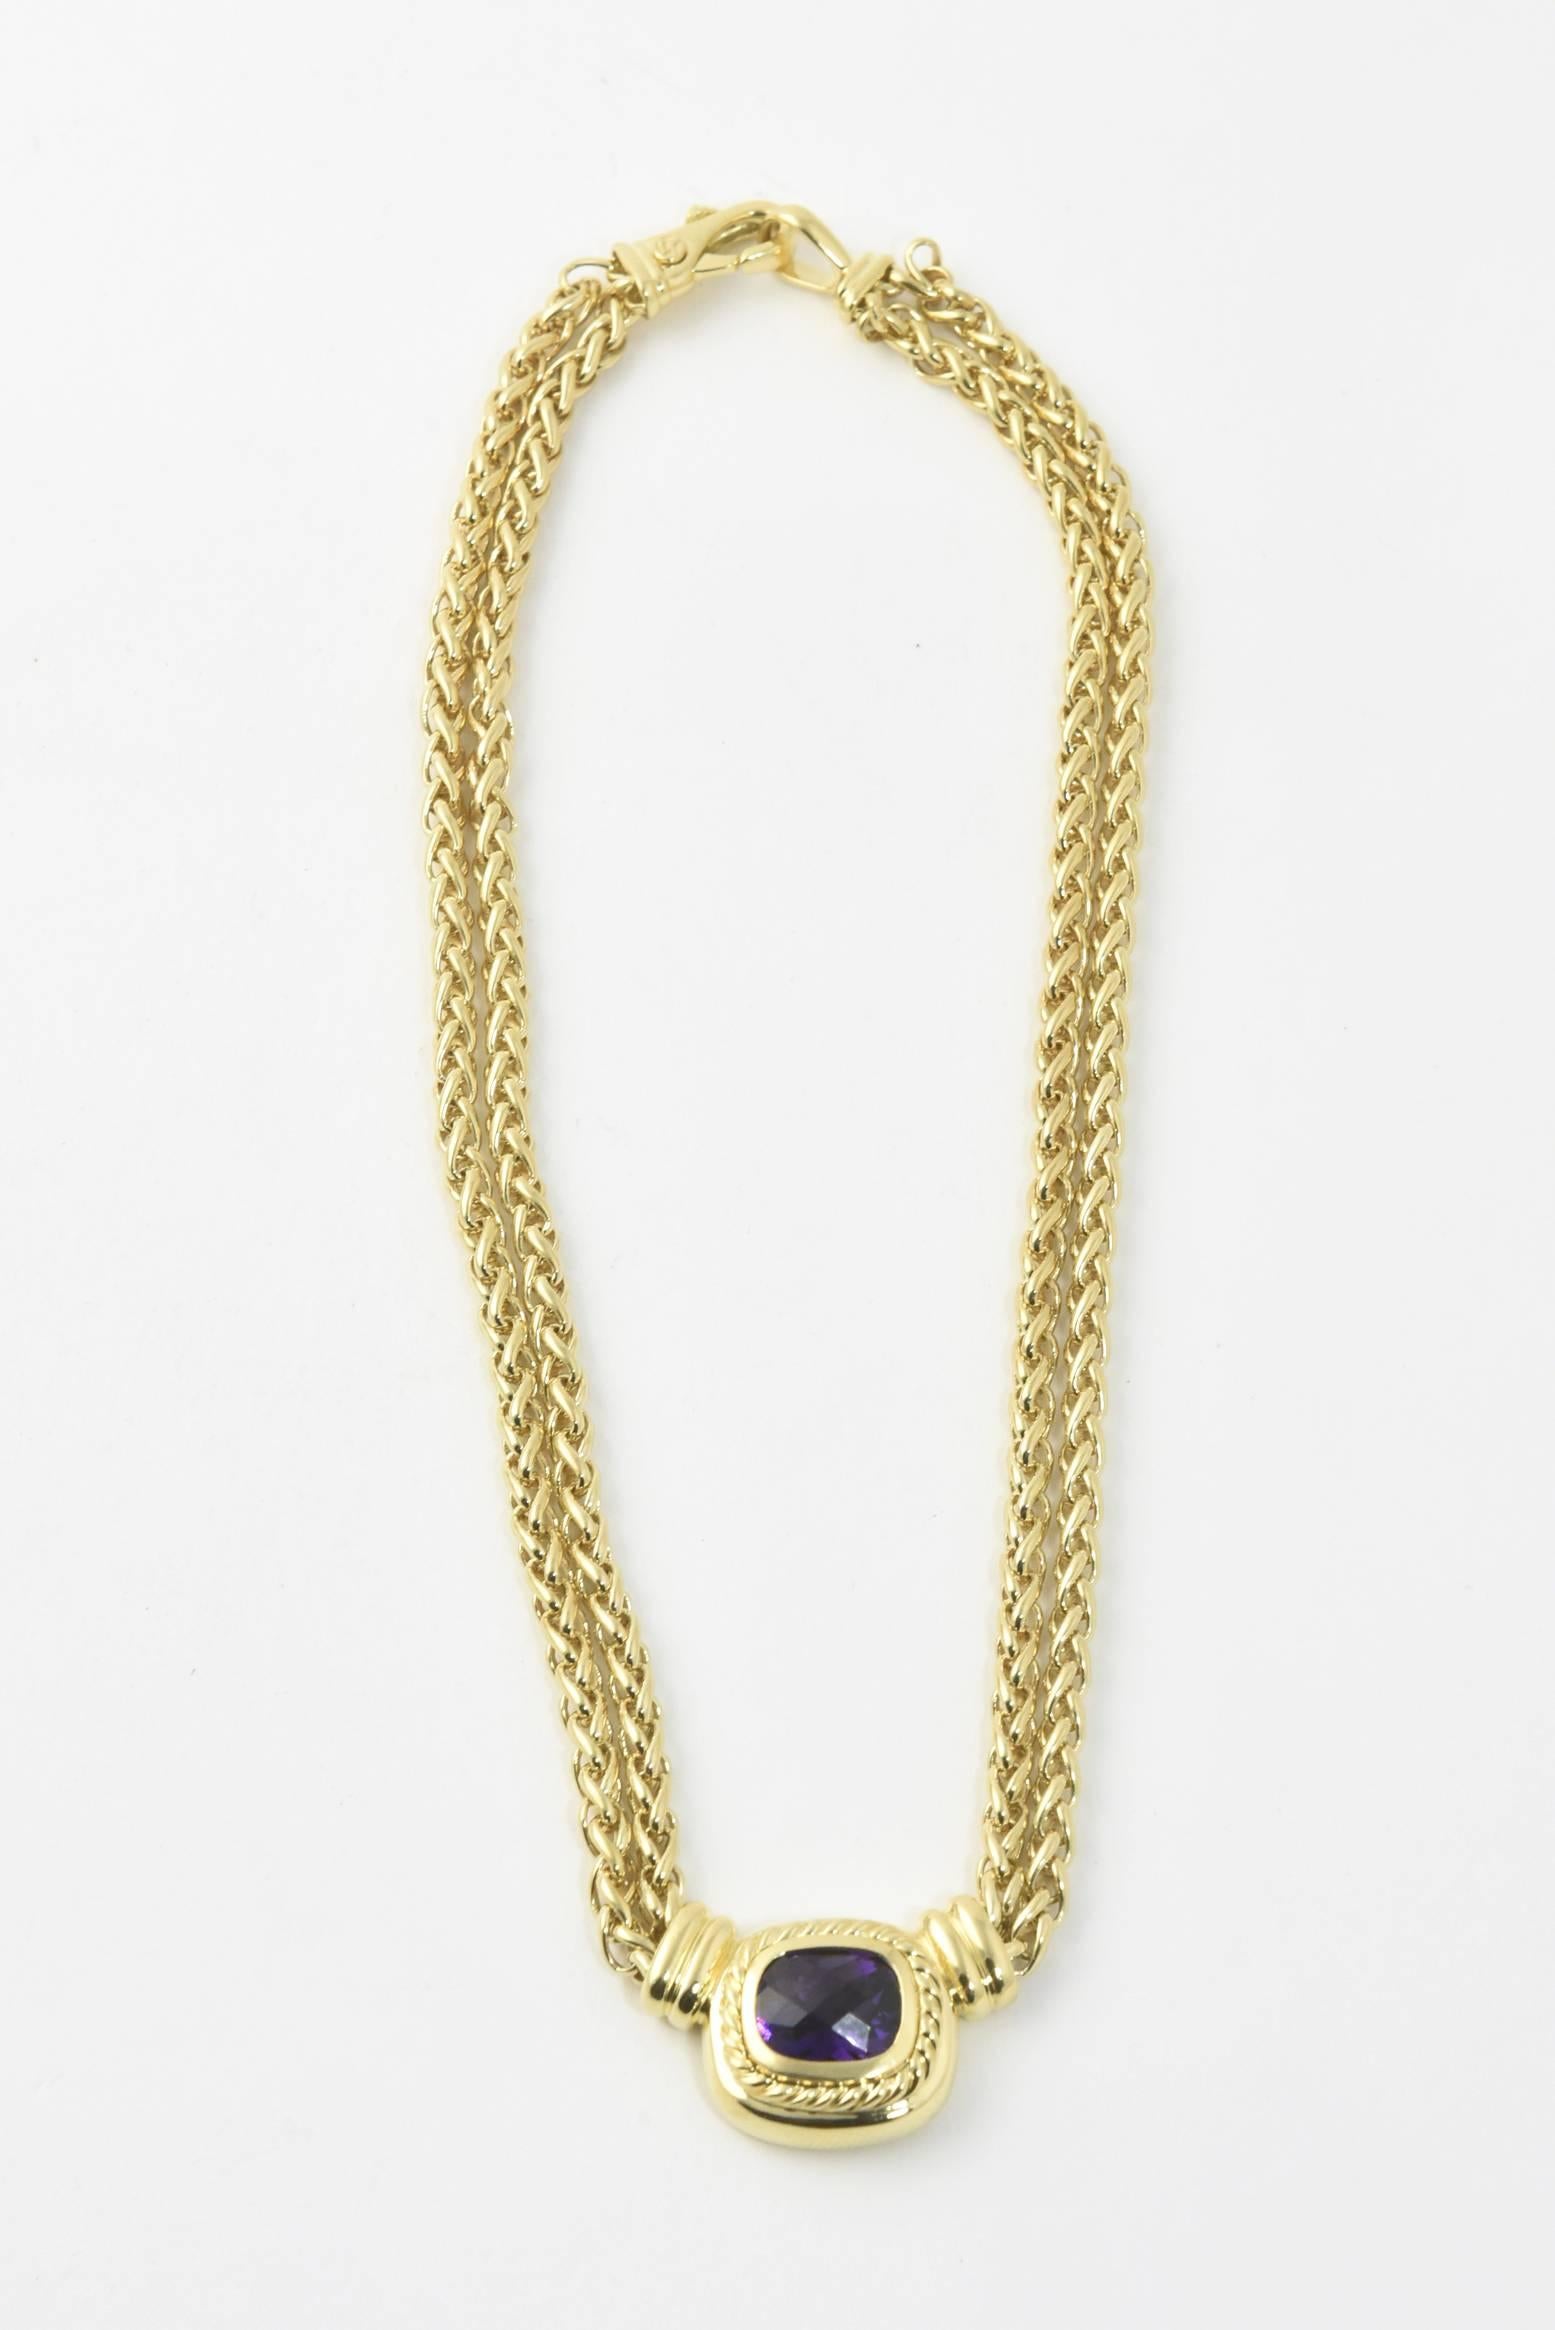 David Yurman 18k yellow gold dual link wheat chain necklace featuring gold accents surrounding a facetted cushion shaped dark amethyst terminating in a  lobster clasp closure.